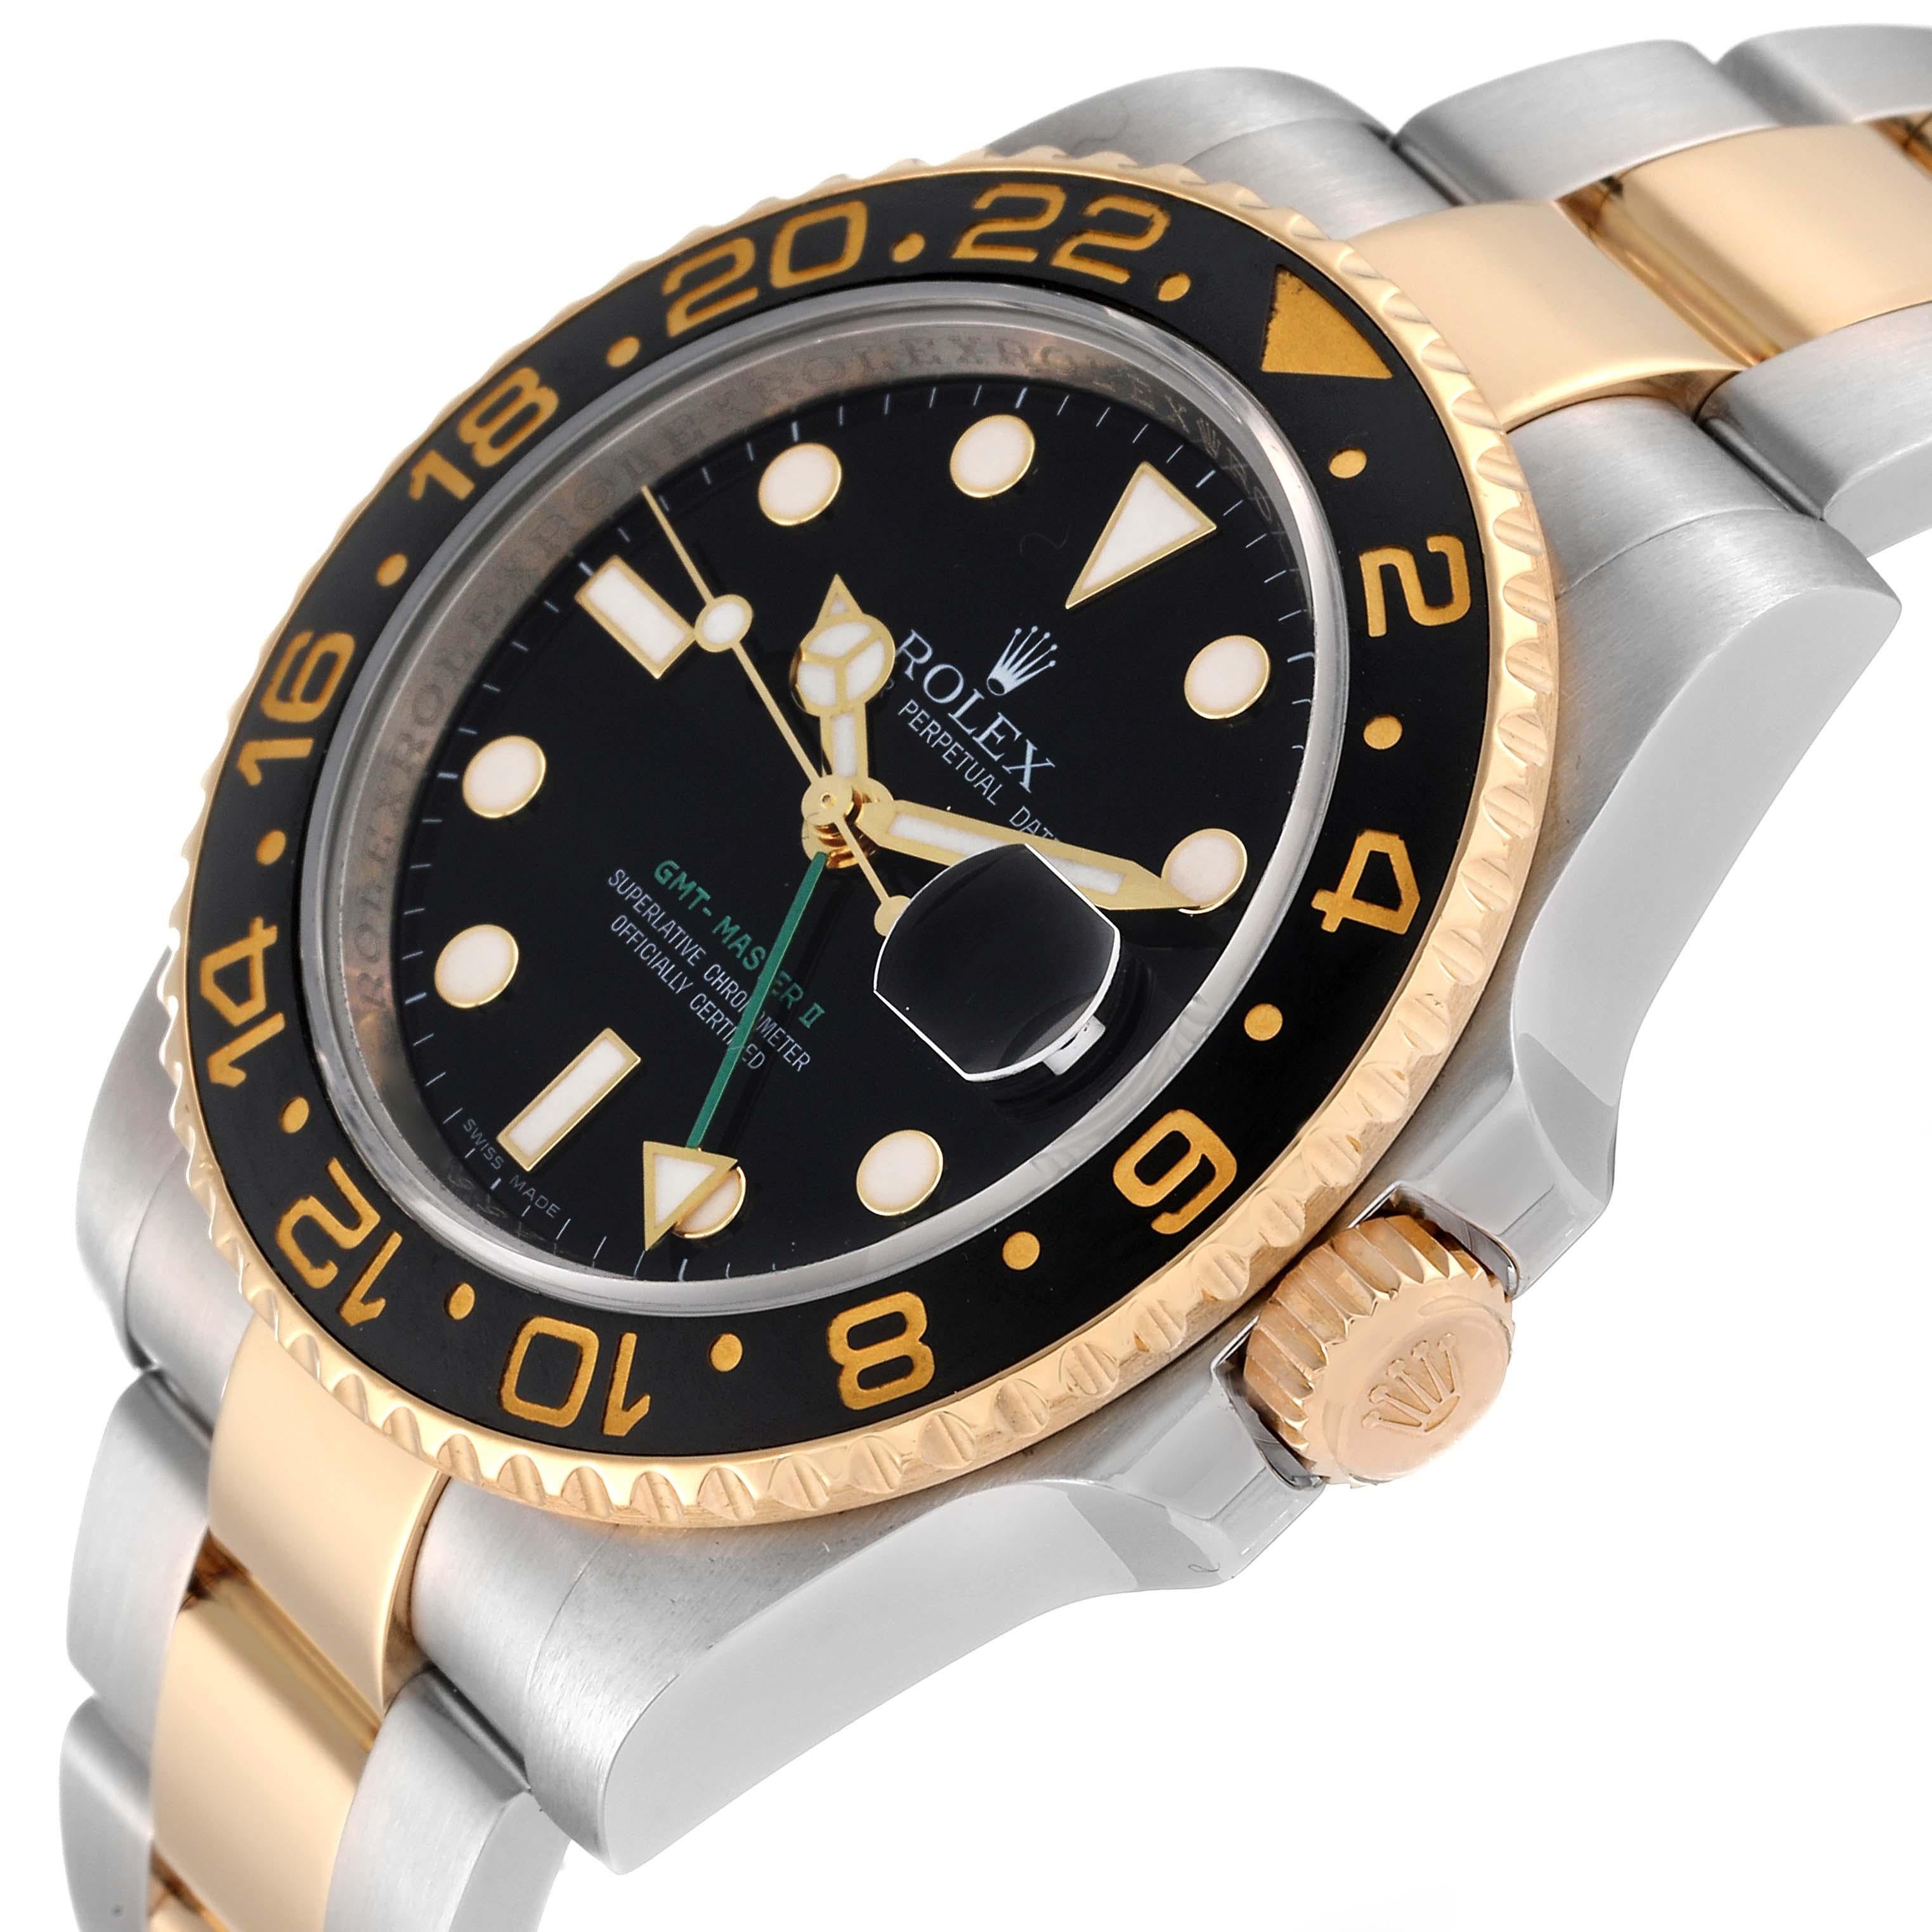 Rolex GMT Master II Steel Yellow Gold Black Dial Mens Watch 116713 Box Card 4